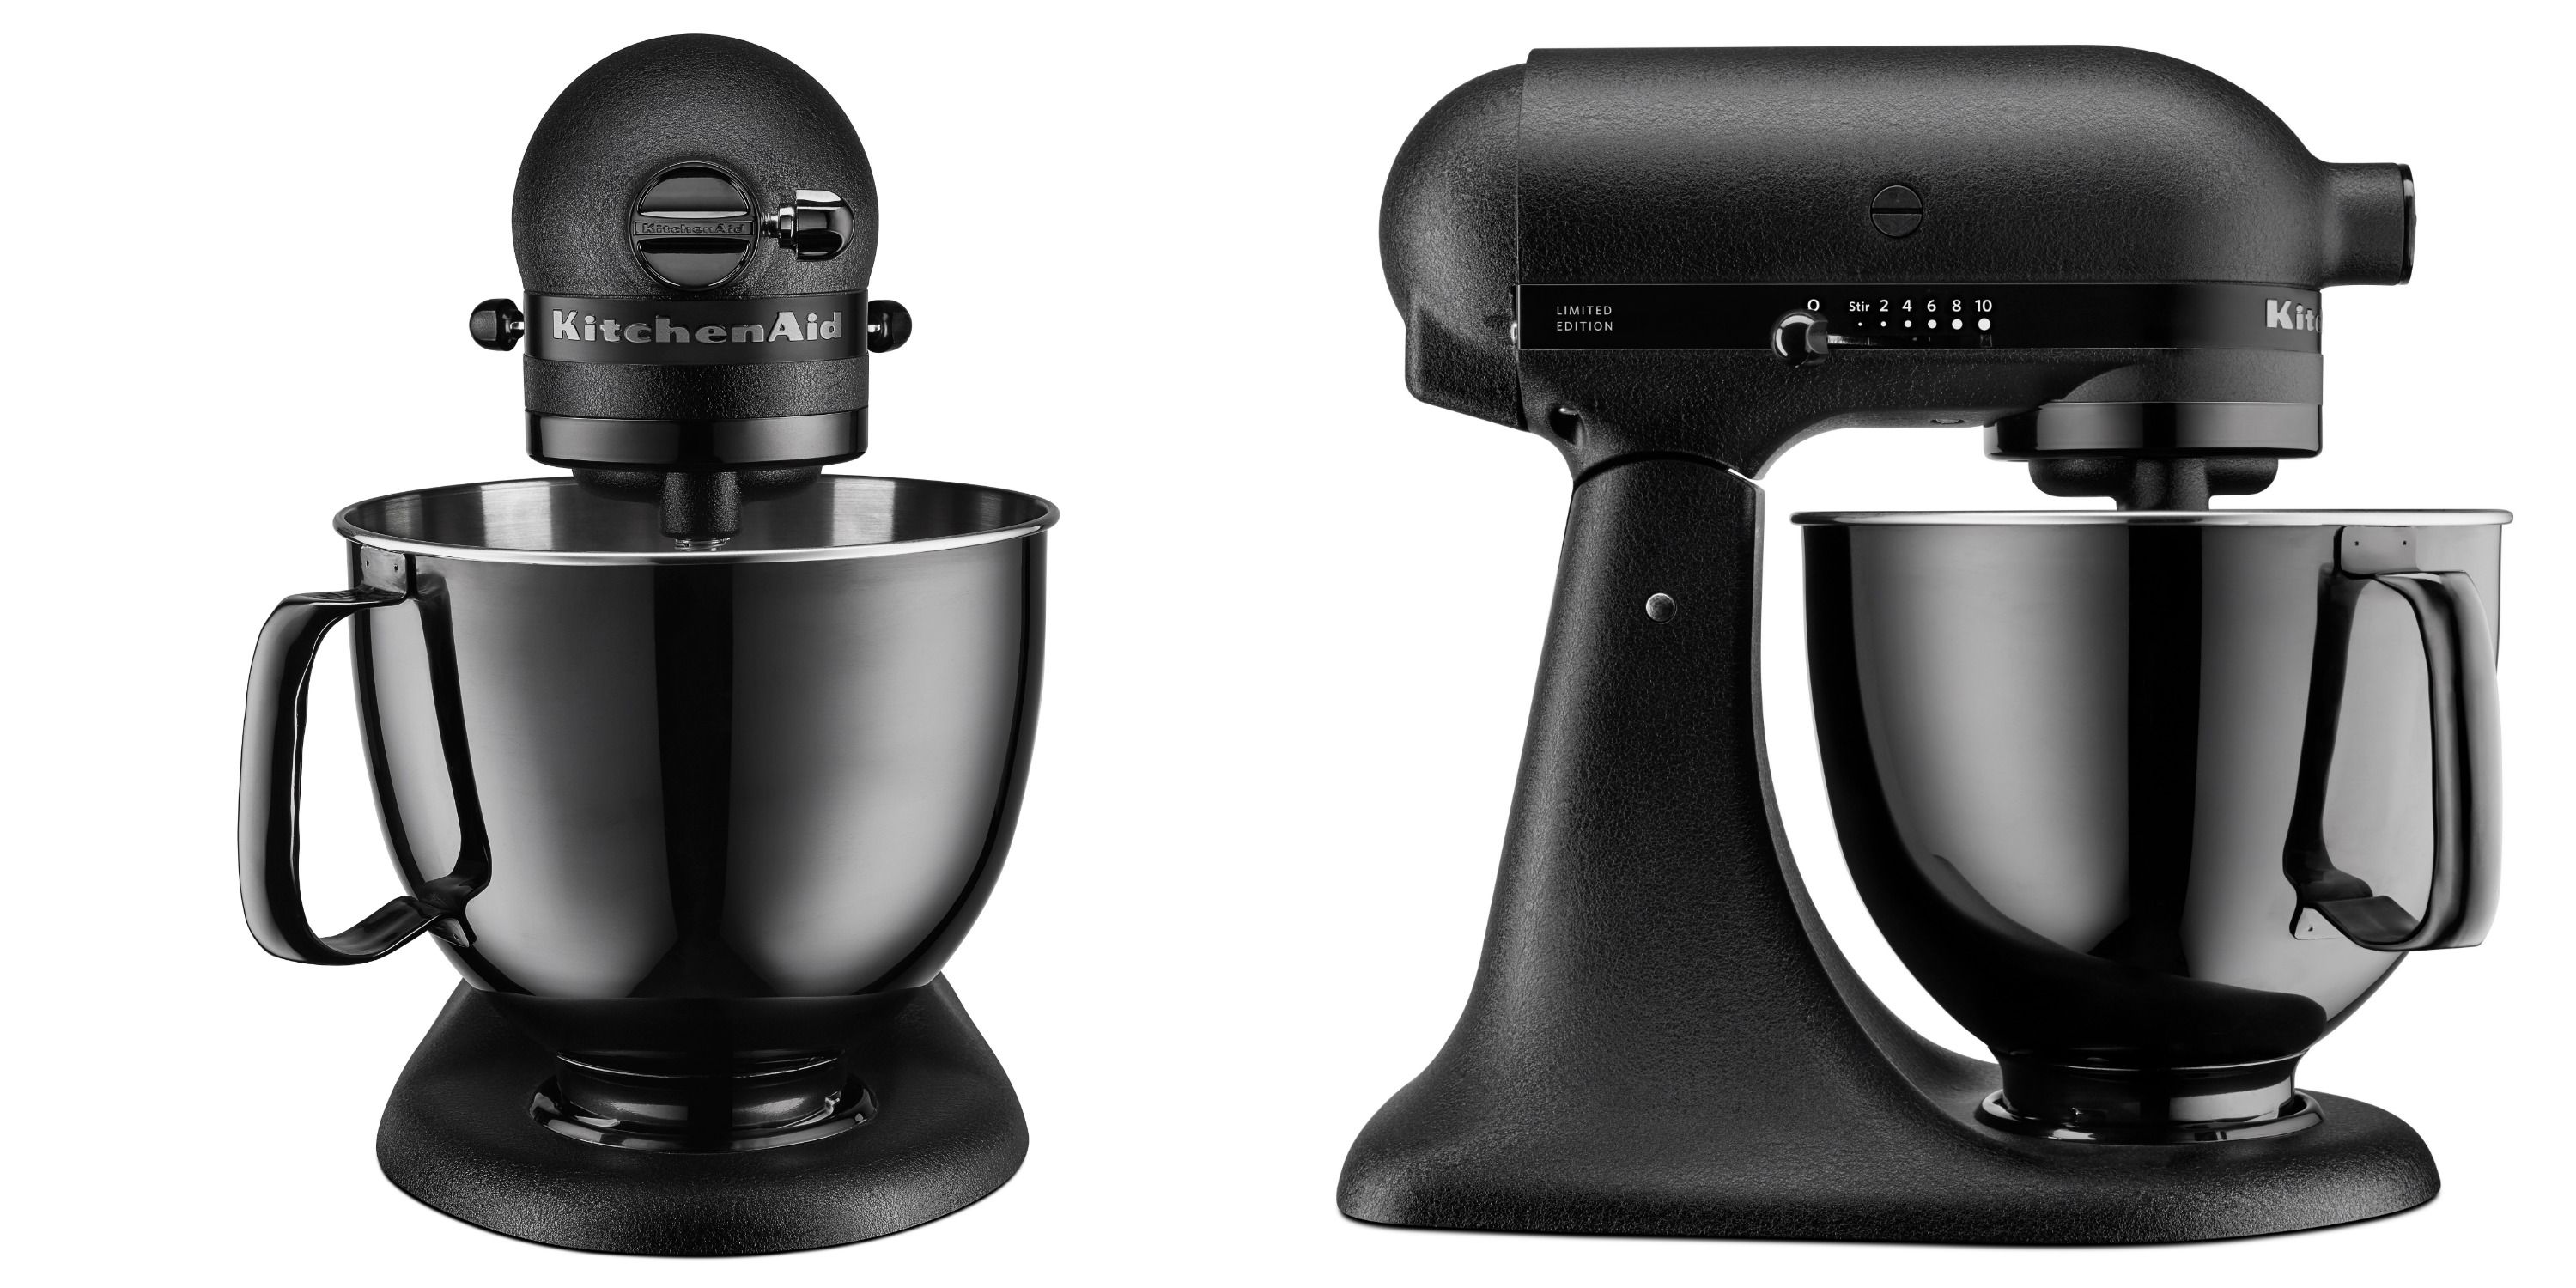 KitchenAid has a new all-black stand mixer, because 2017 demands